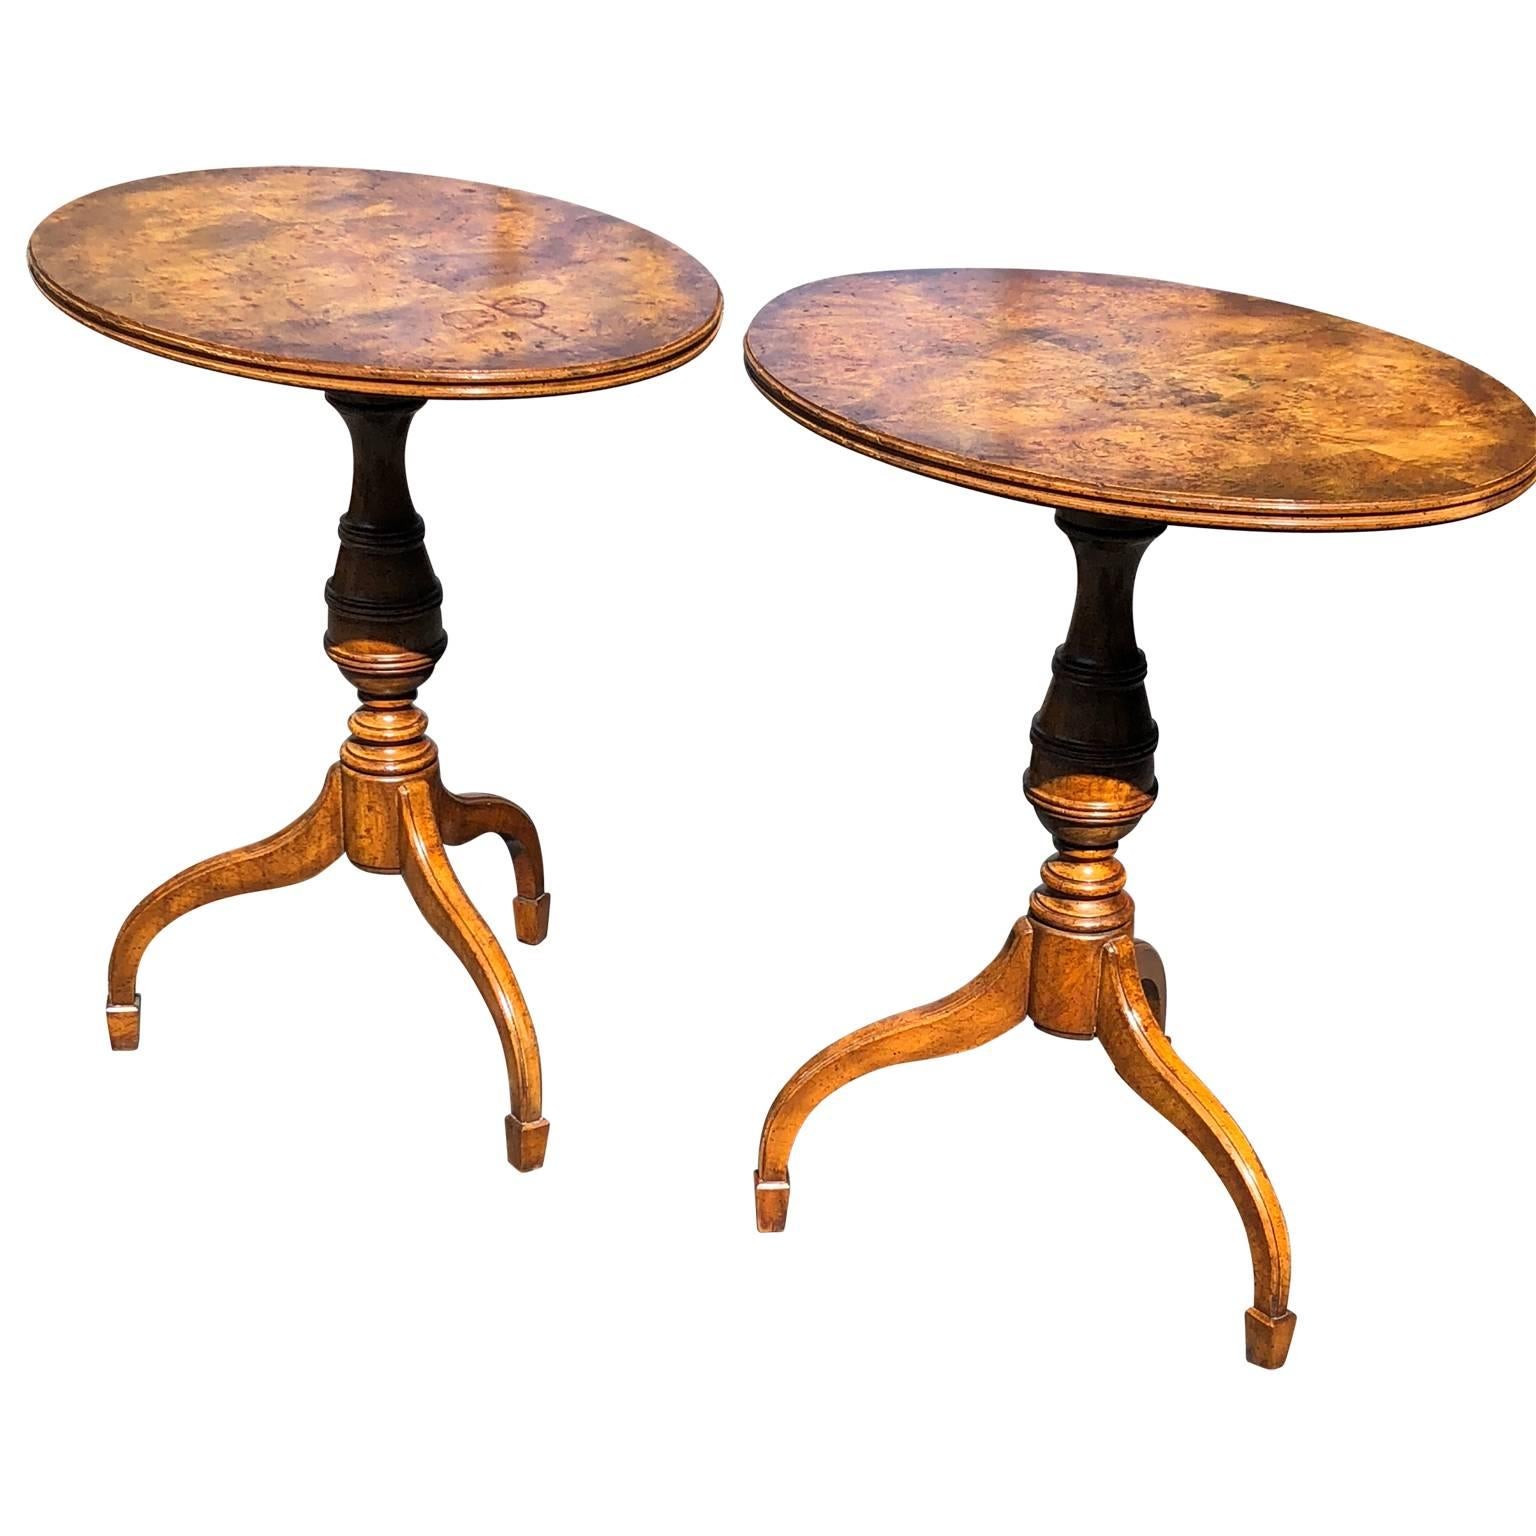 American Pair of Mid-Century Modern Burl Wood Lamp or Side Tables by Weiman